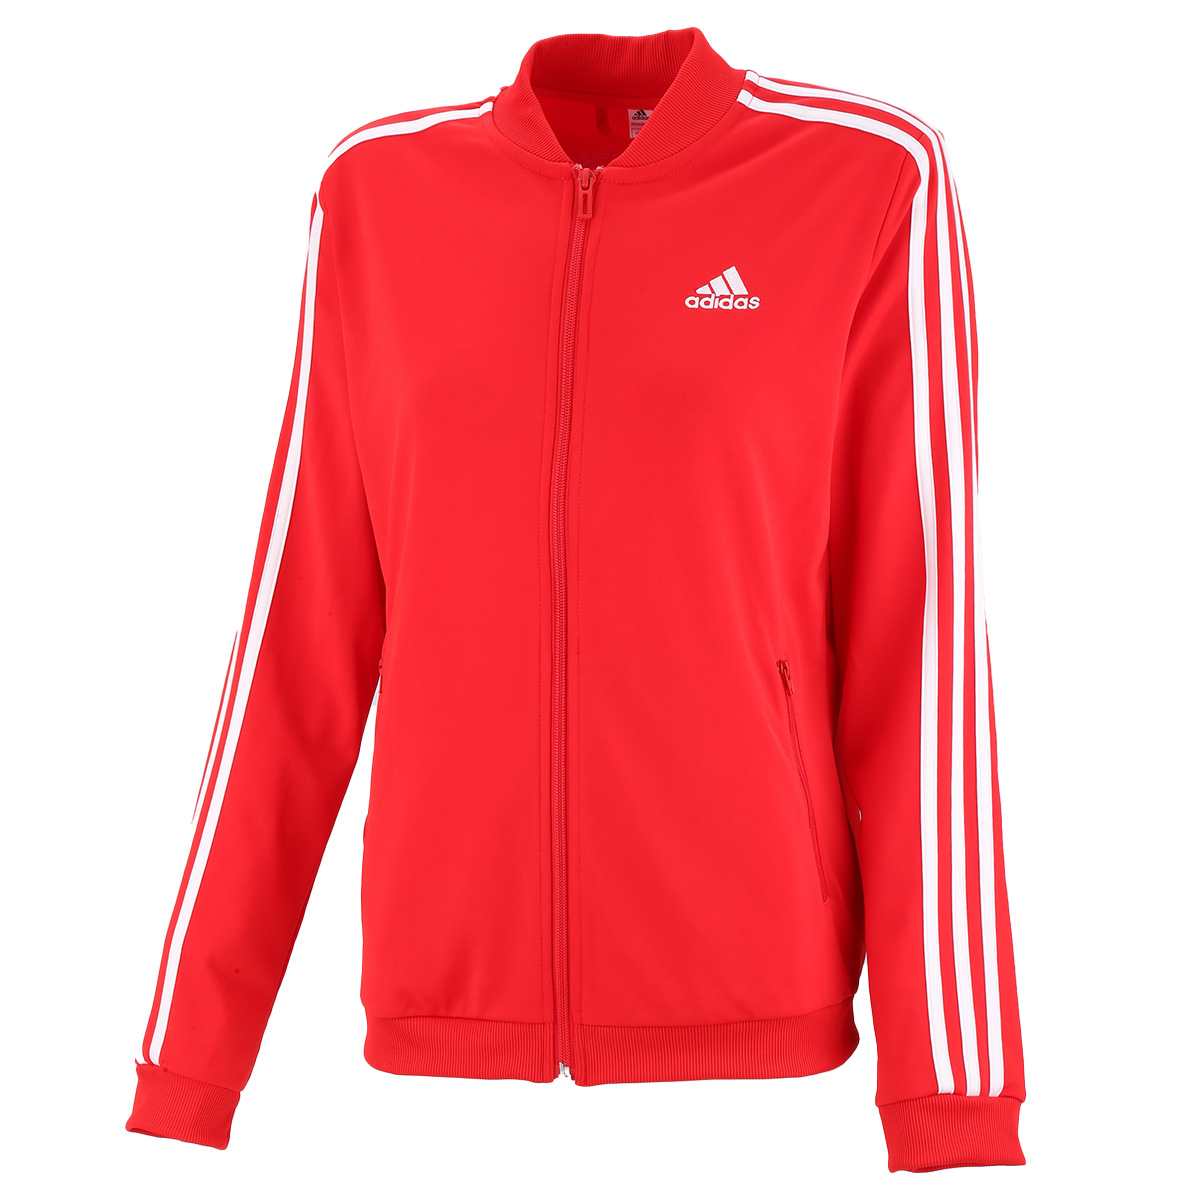 Conjunto adidas 3S TR TS,  image number null